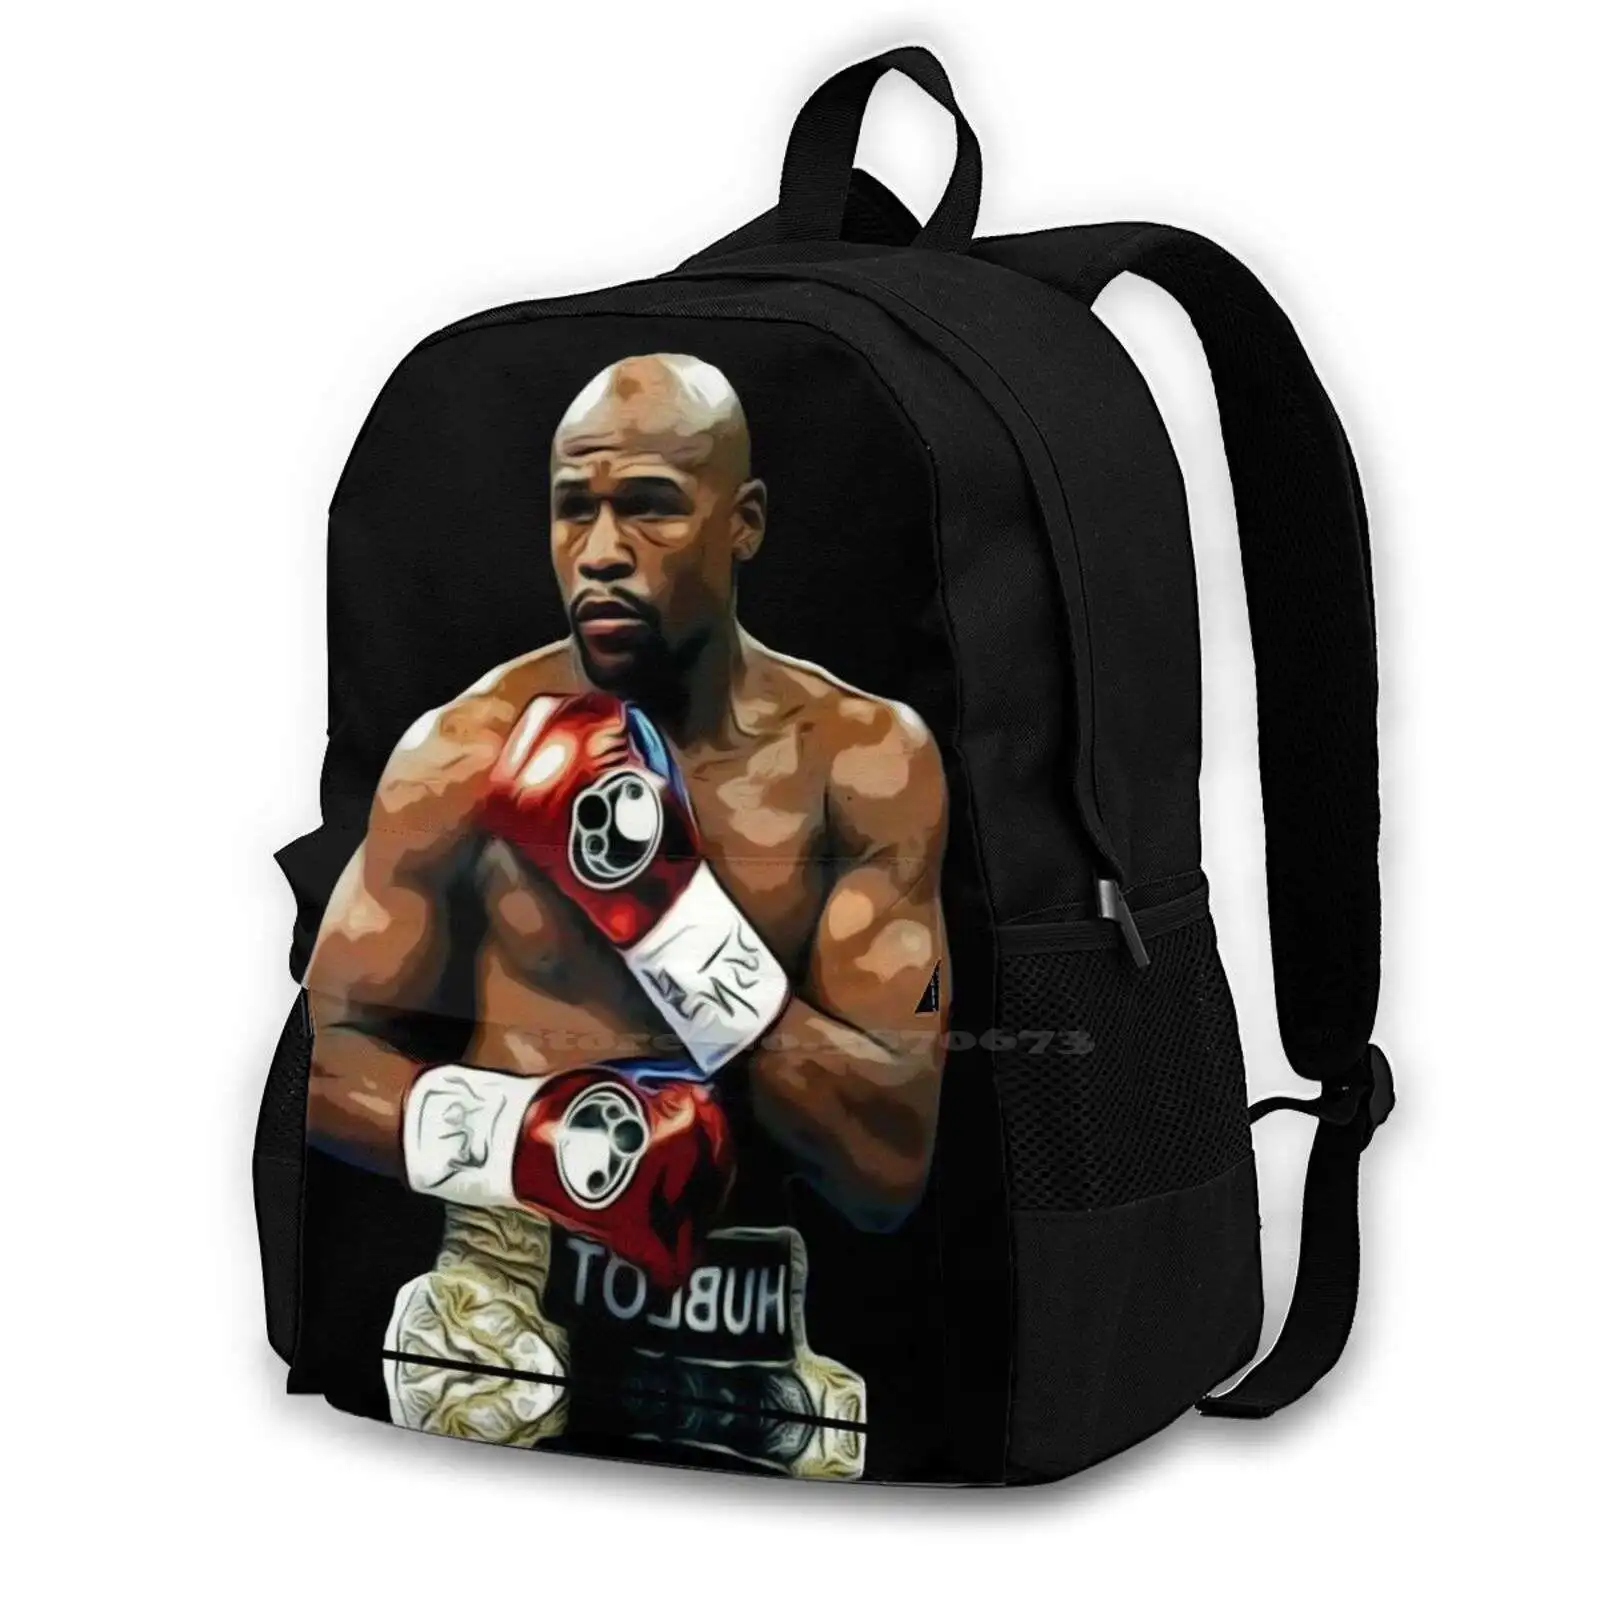 

Boxing Legend Money Backpacks For Men Women Teenagers Girls Bags Boxing Mayweather Floyd Boxer Sports Fight Heavyweight Legend